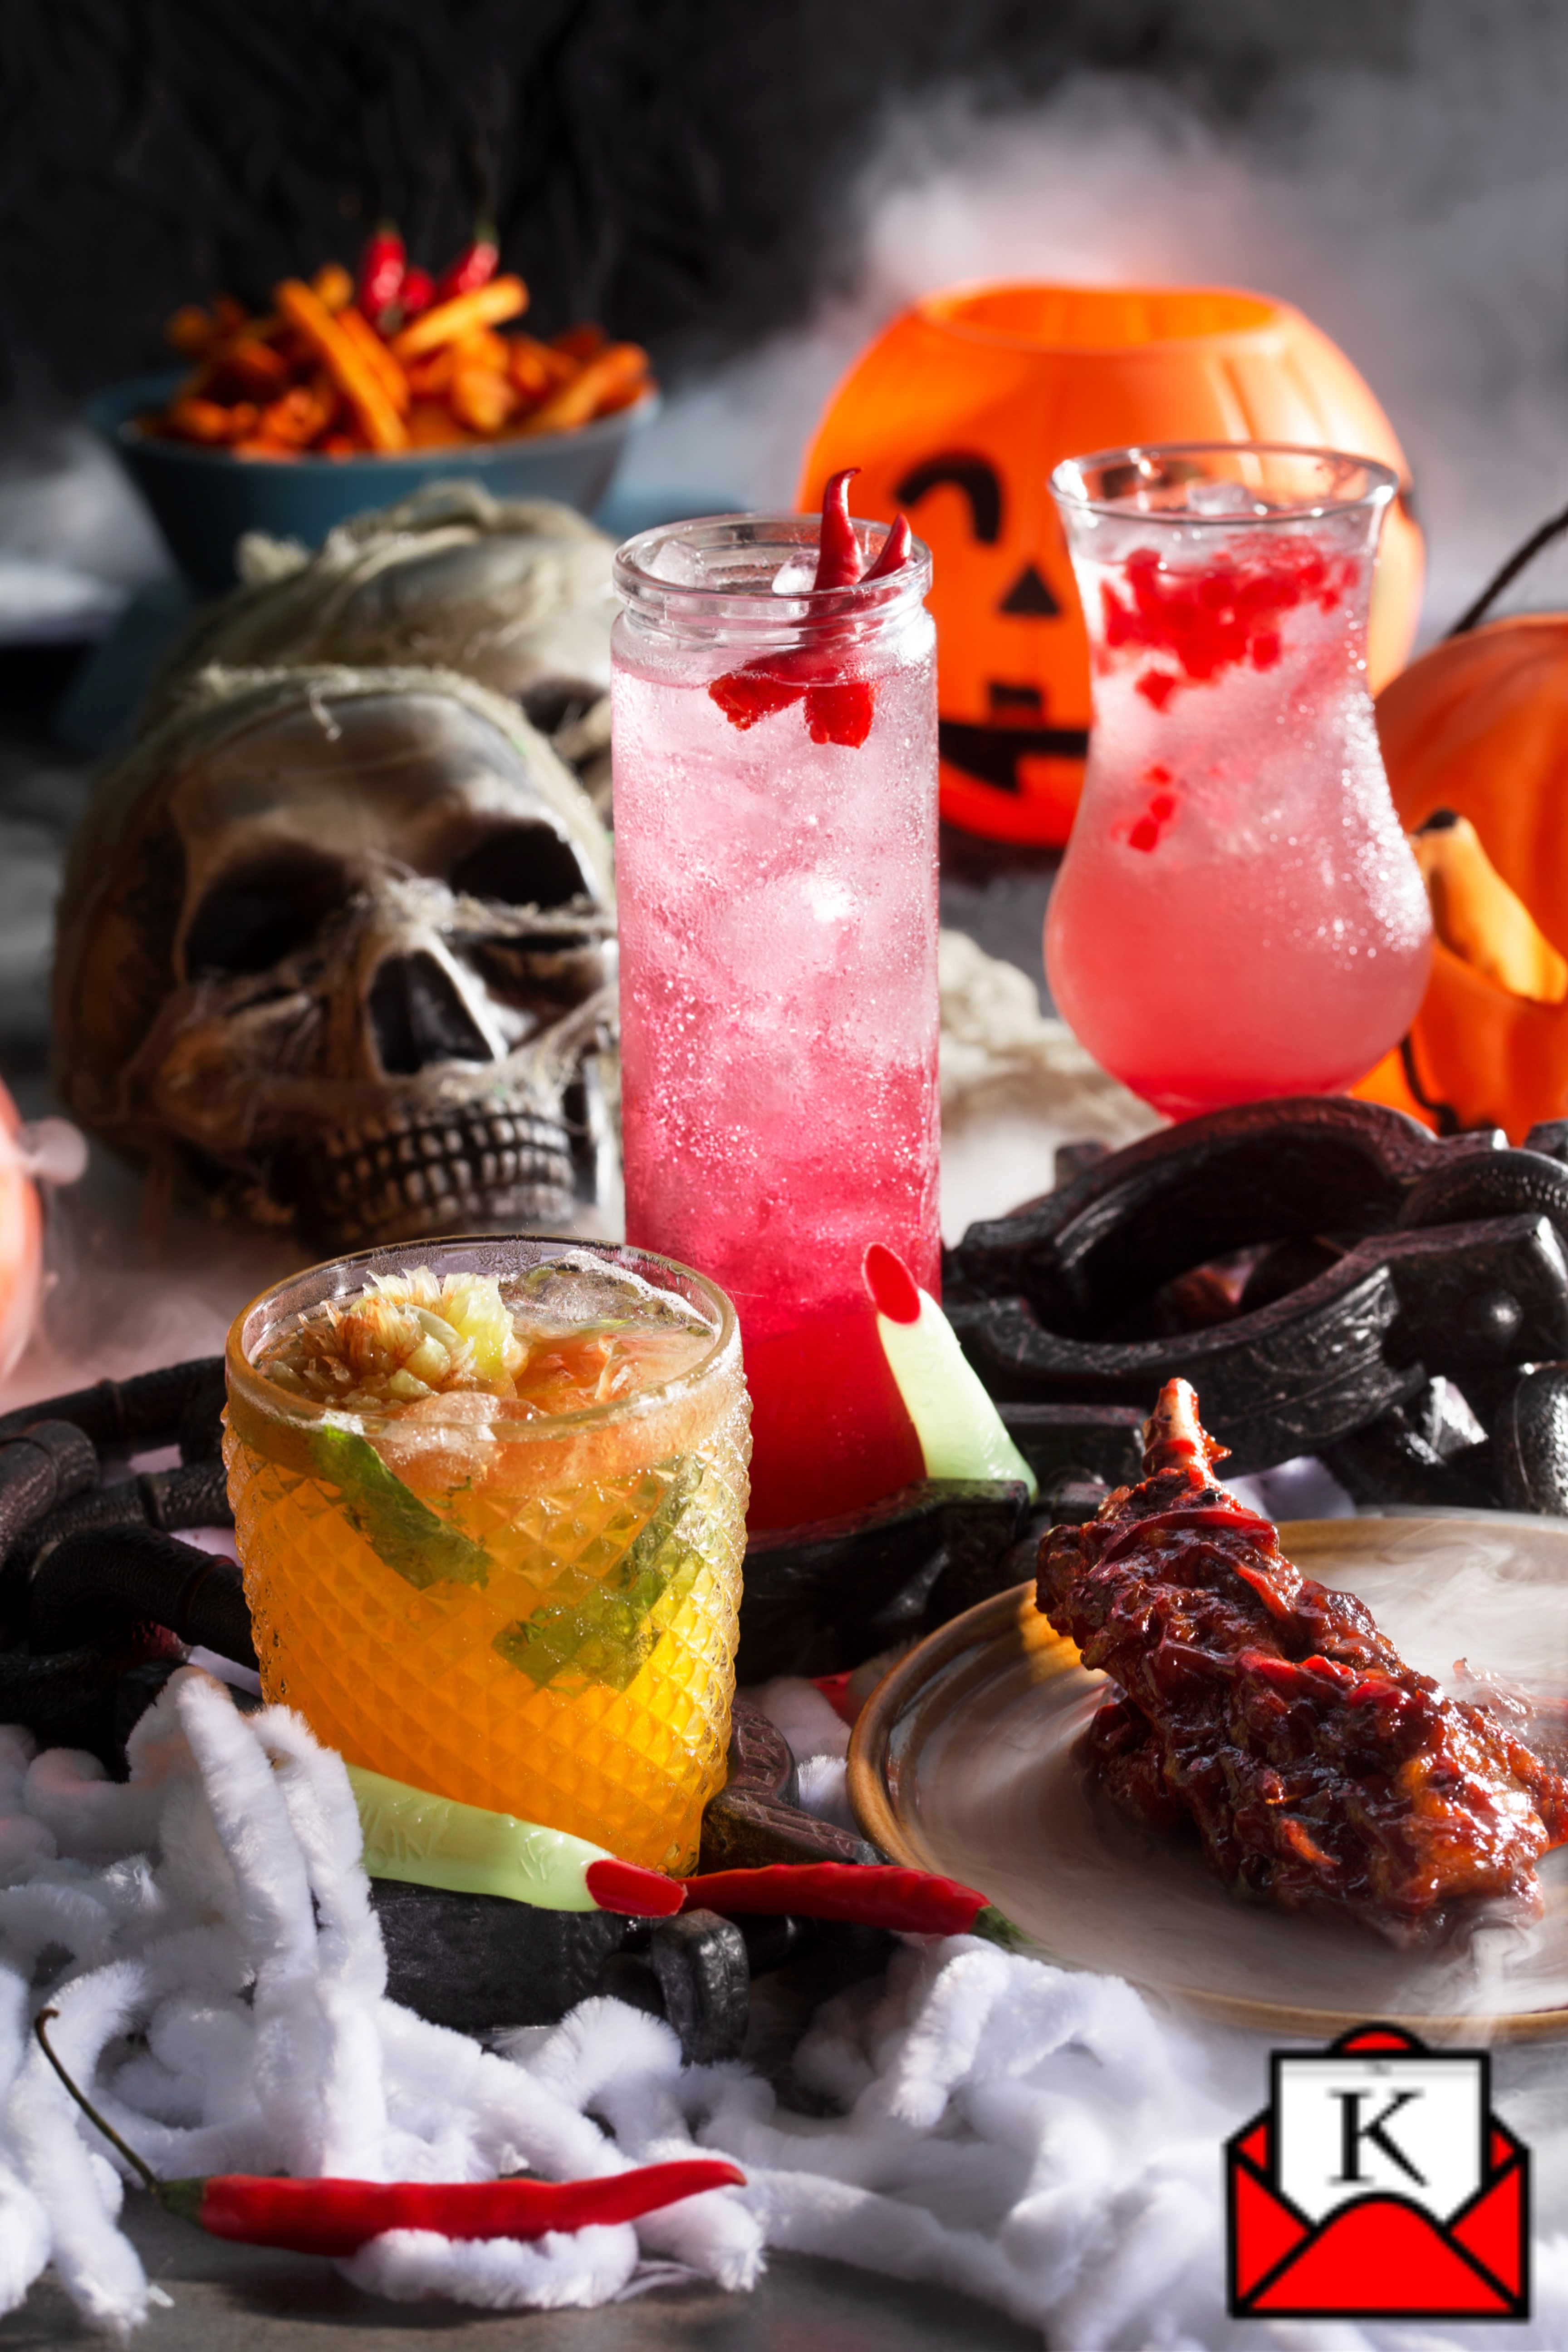 Celebrate Halloween at Monkey Bar’s Haunted House on 31st October